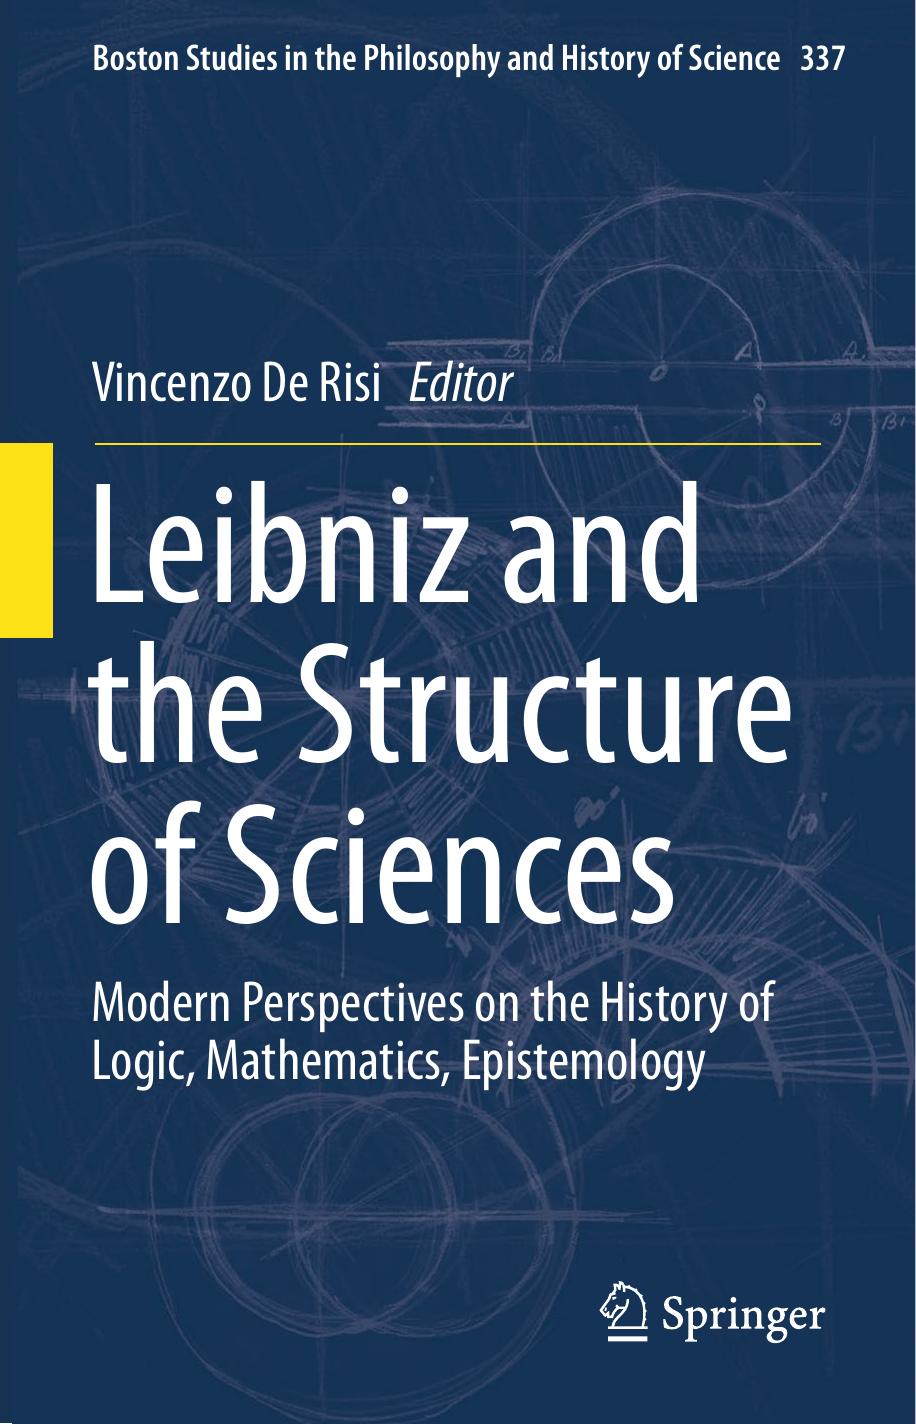 Leibniz and the Structure of Sciences: Modern Perspectives on the History of Logic, Mathematics, Epistemology by Vincenzo De Risi